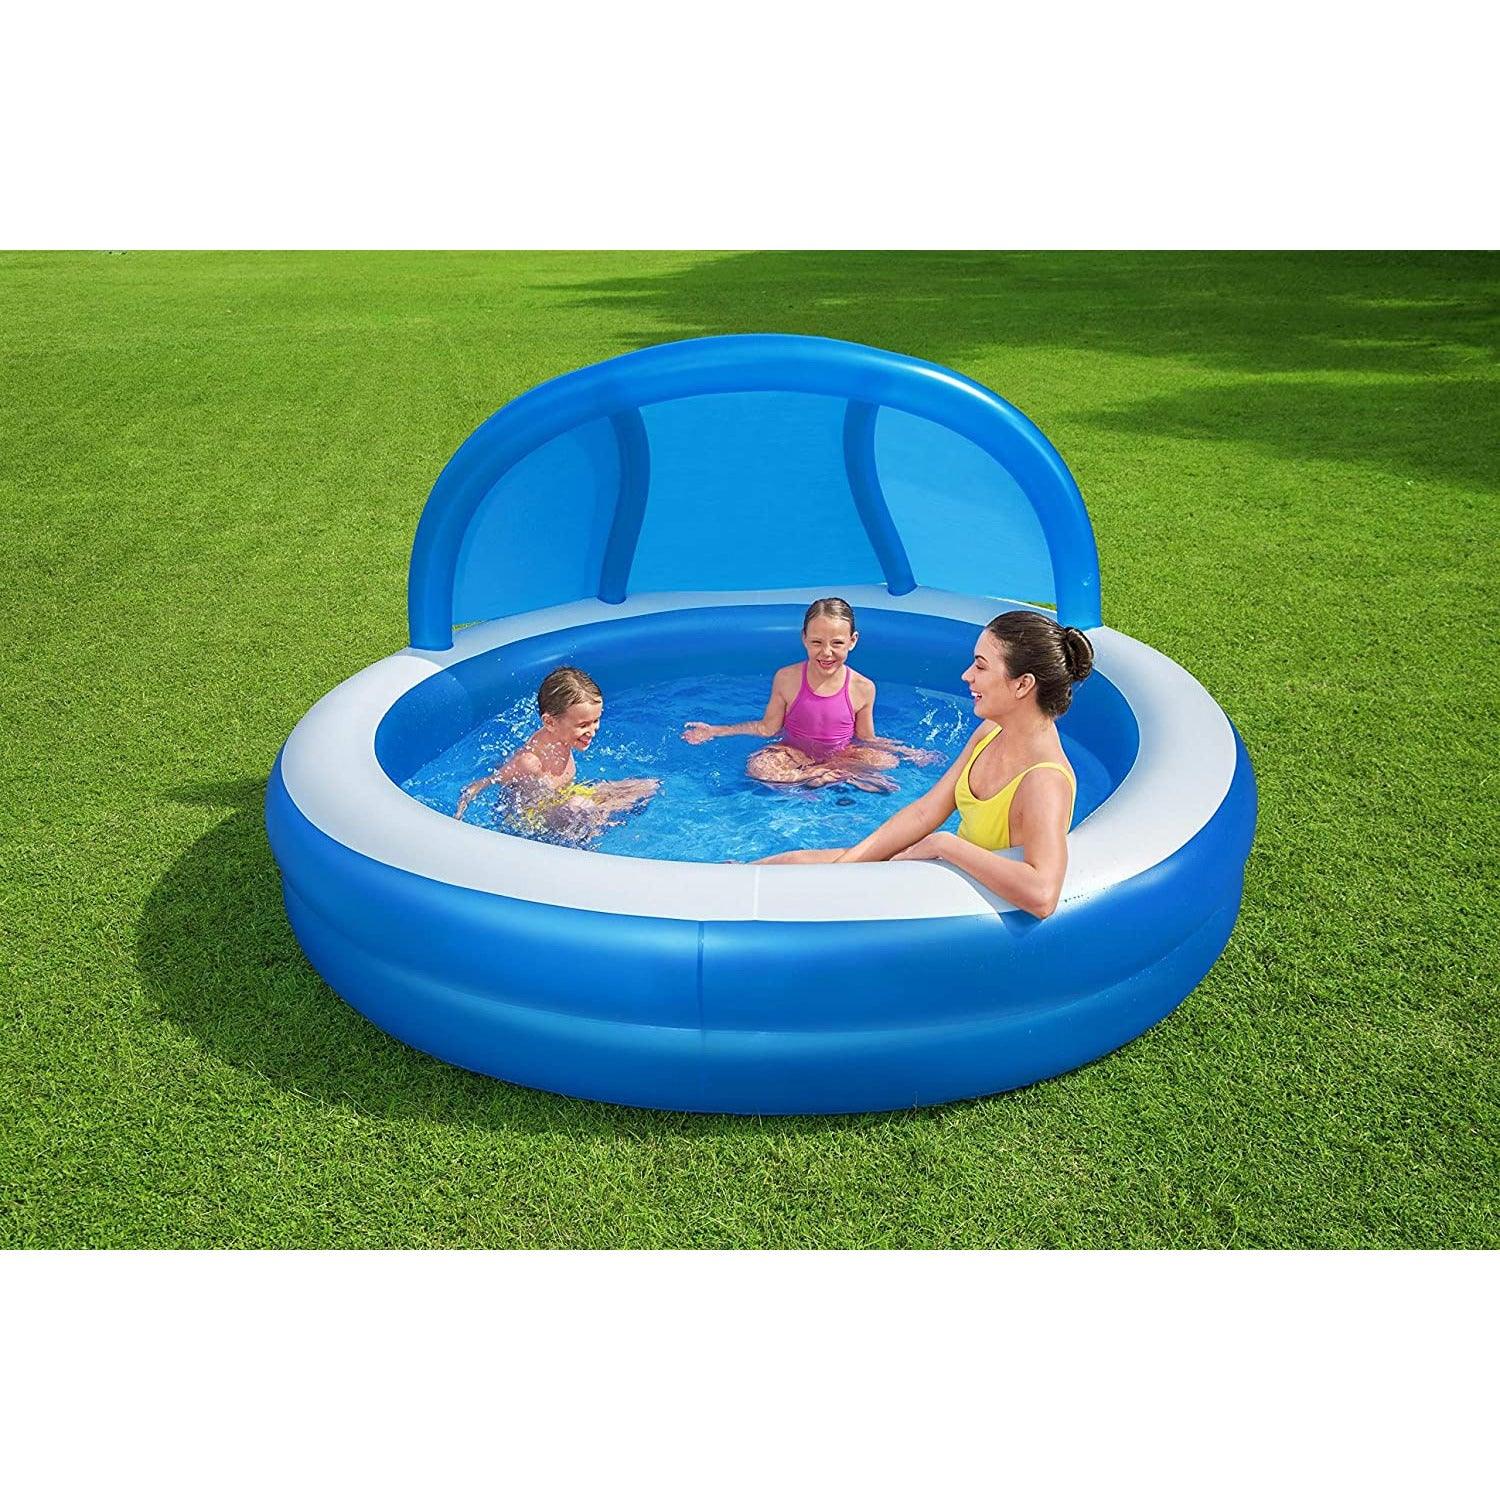 Bestway 54337 Swimming Pool With Sunshade  241 x 140 cm